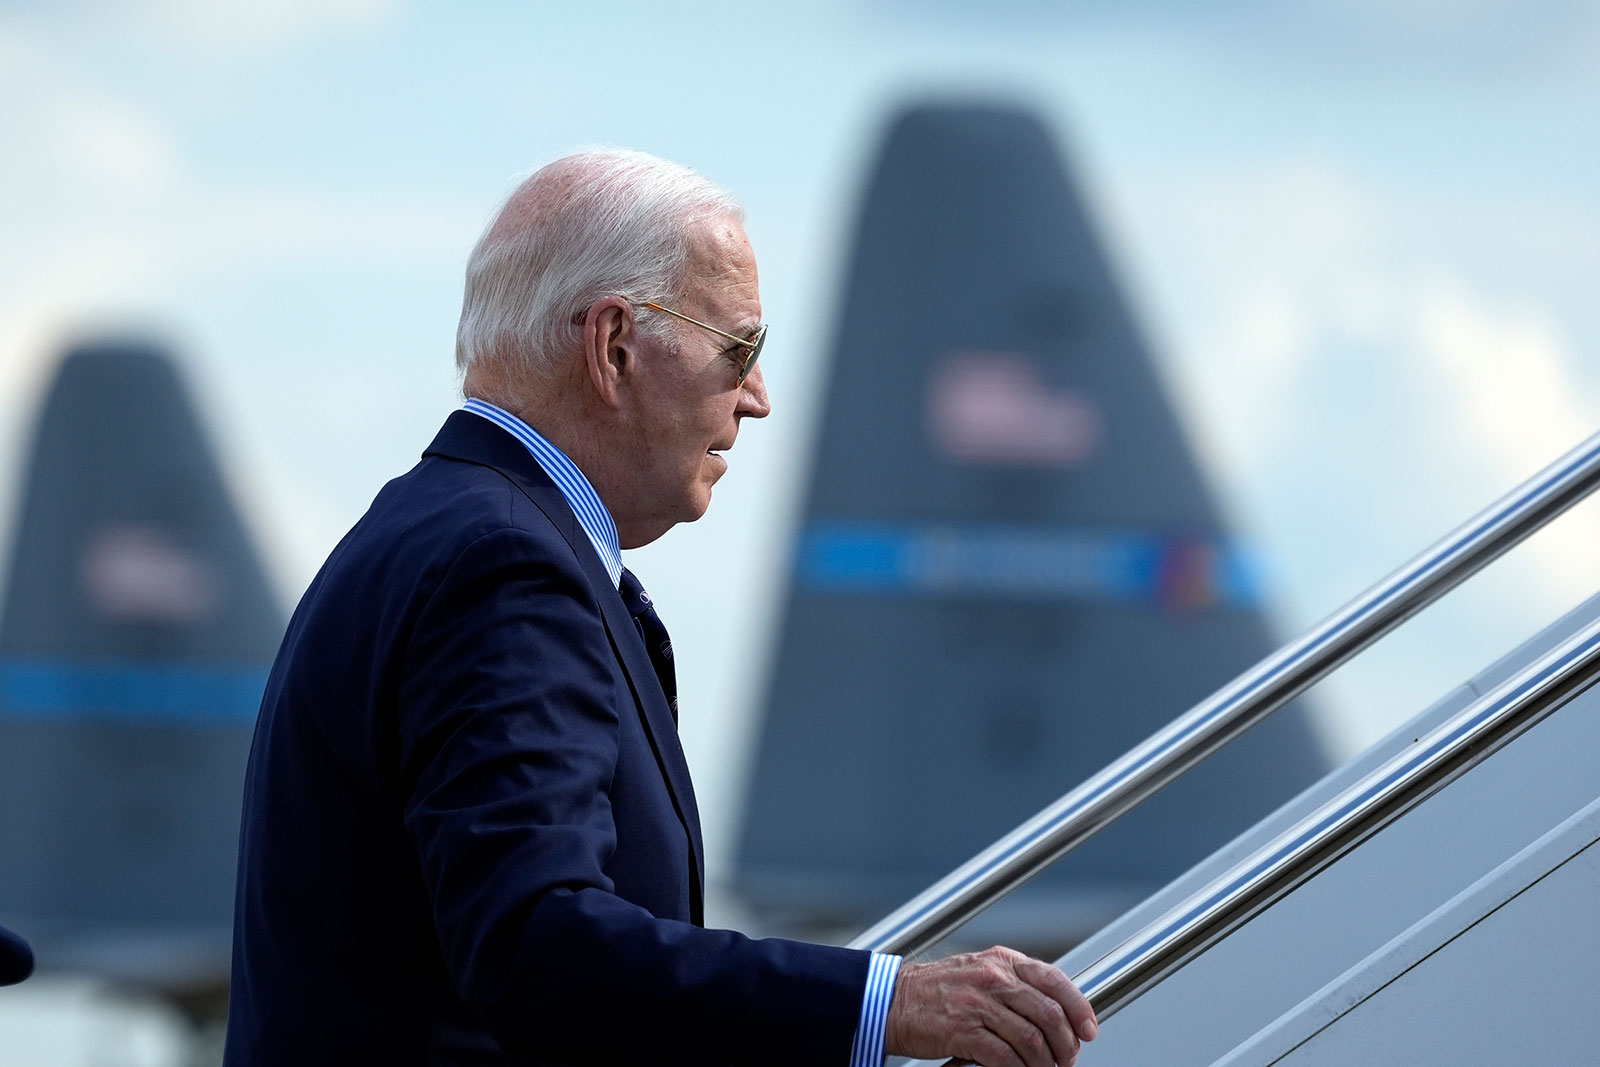 President Joe Biden boards Air Force One at Delaware Air National Guard Base in New Castle, Delaware, on Monday, June 3.